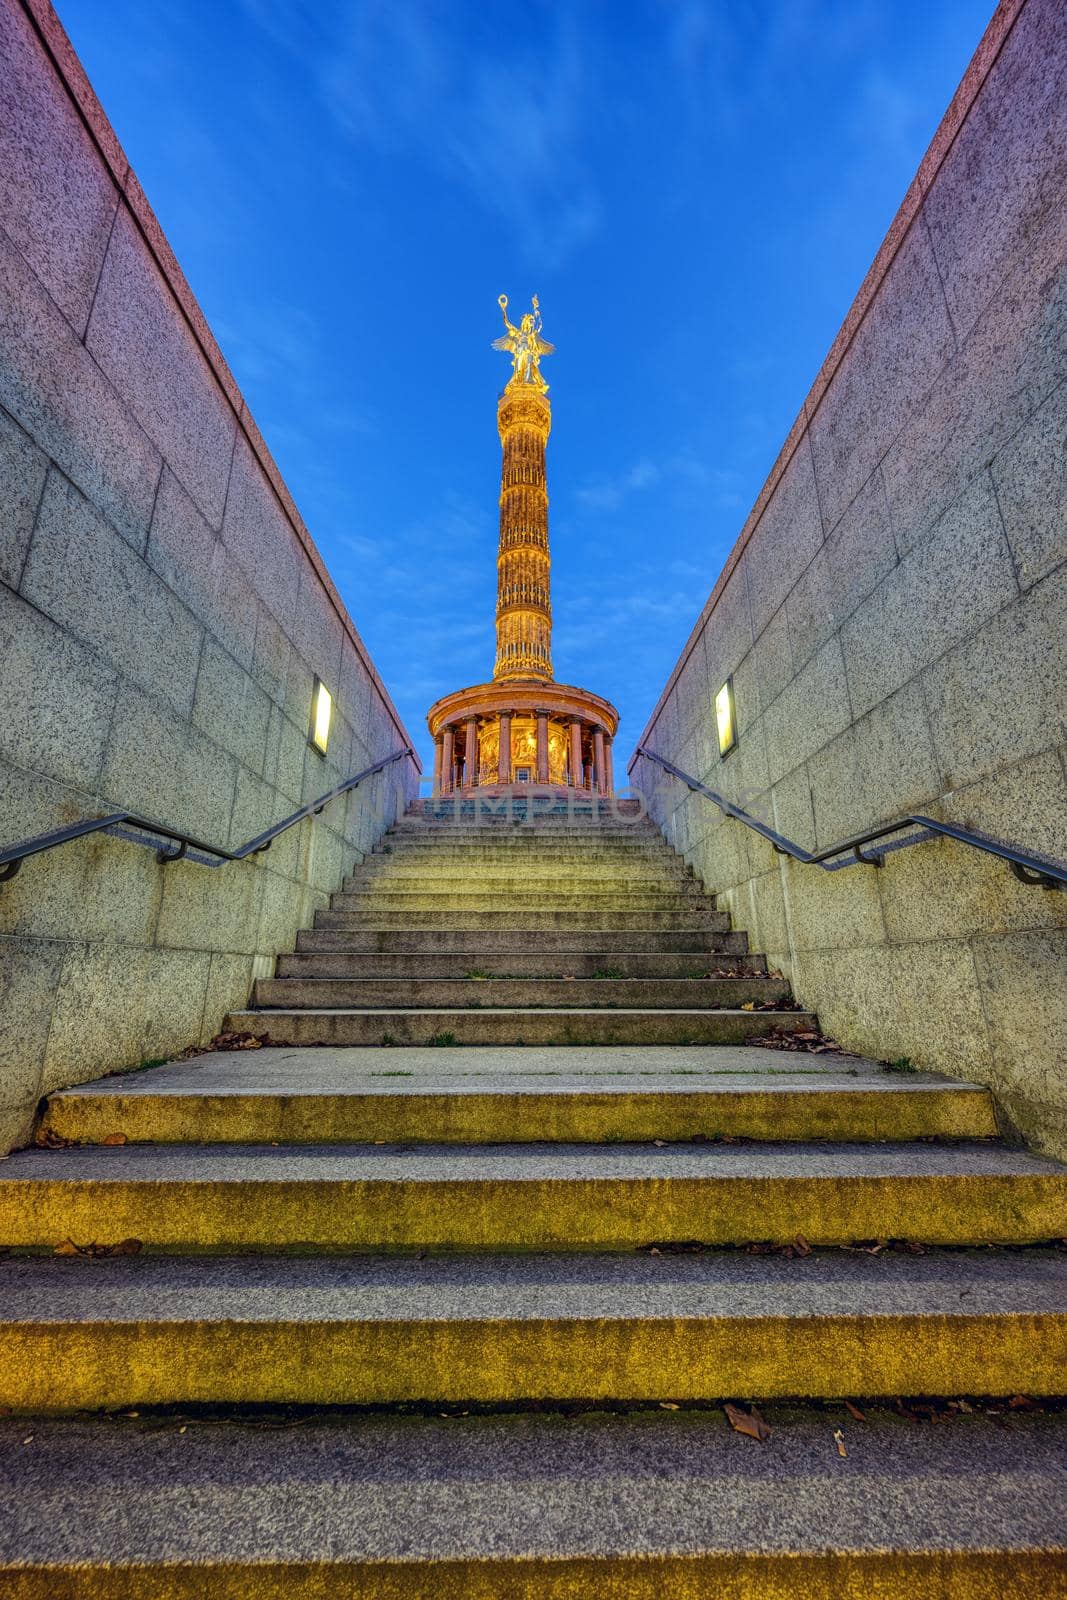 The Victory Column in Berlin at night seen from an underpass